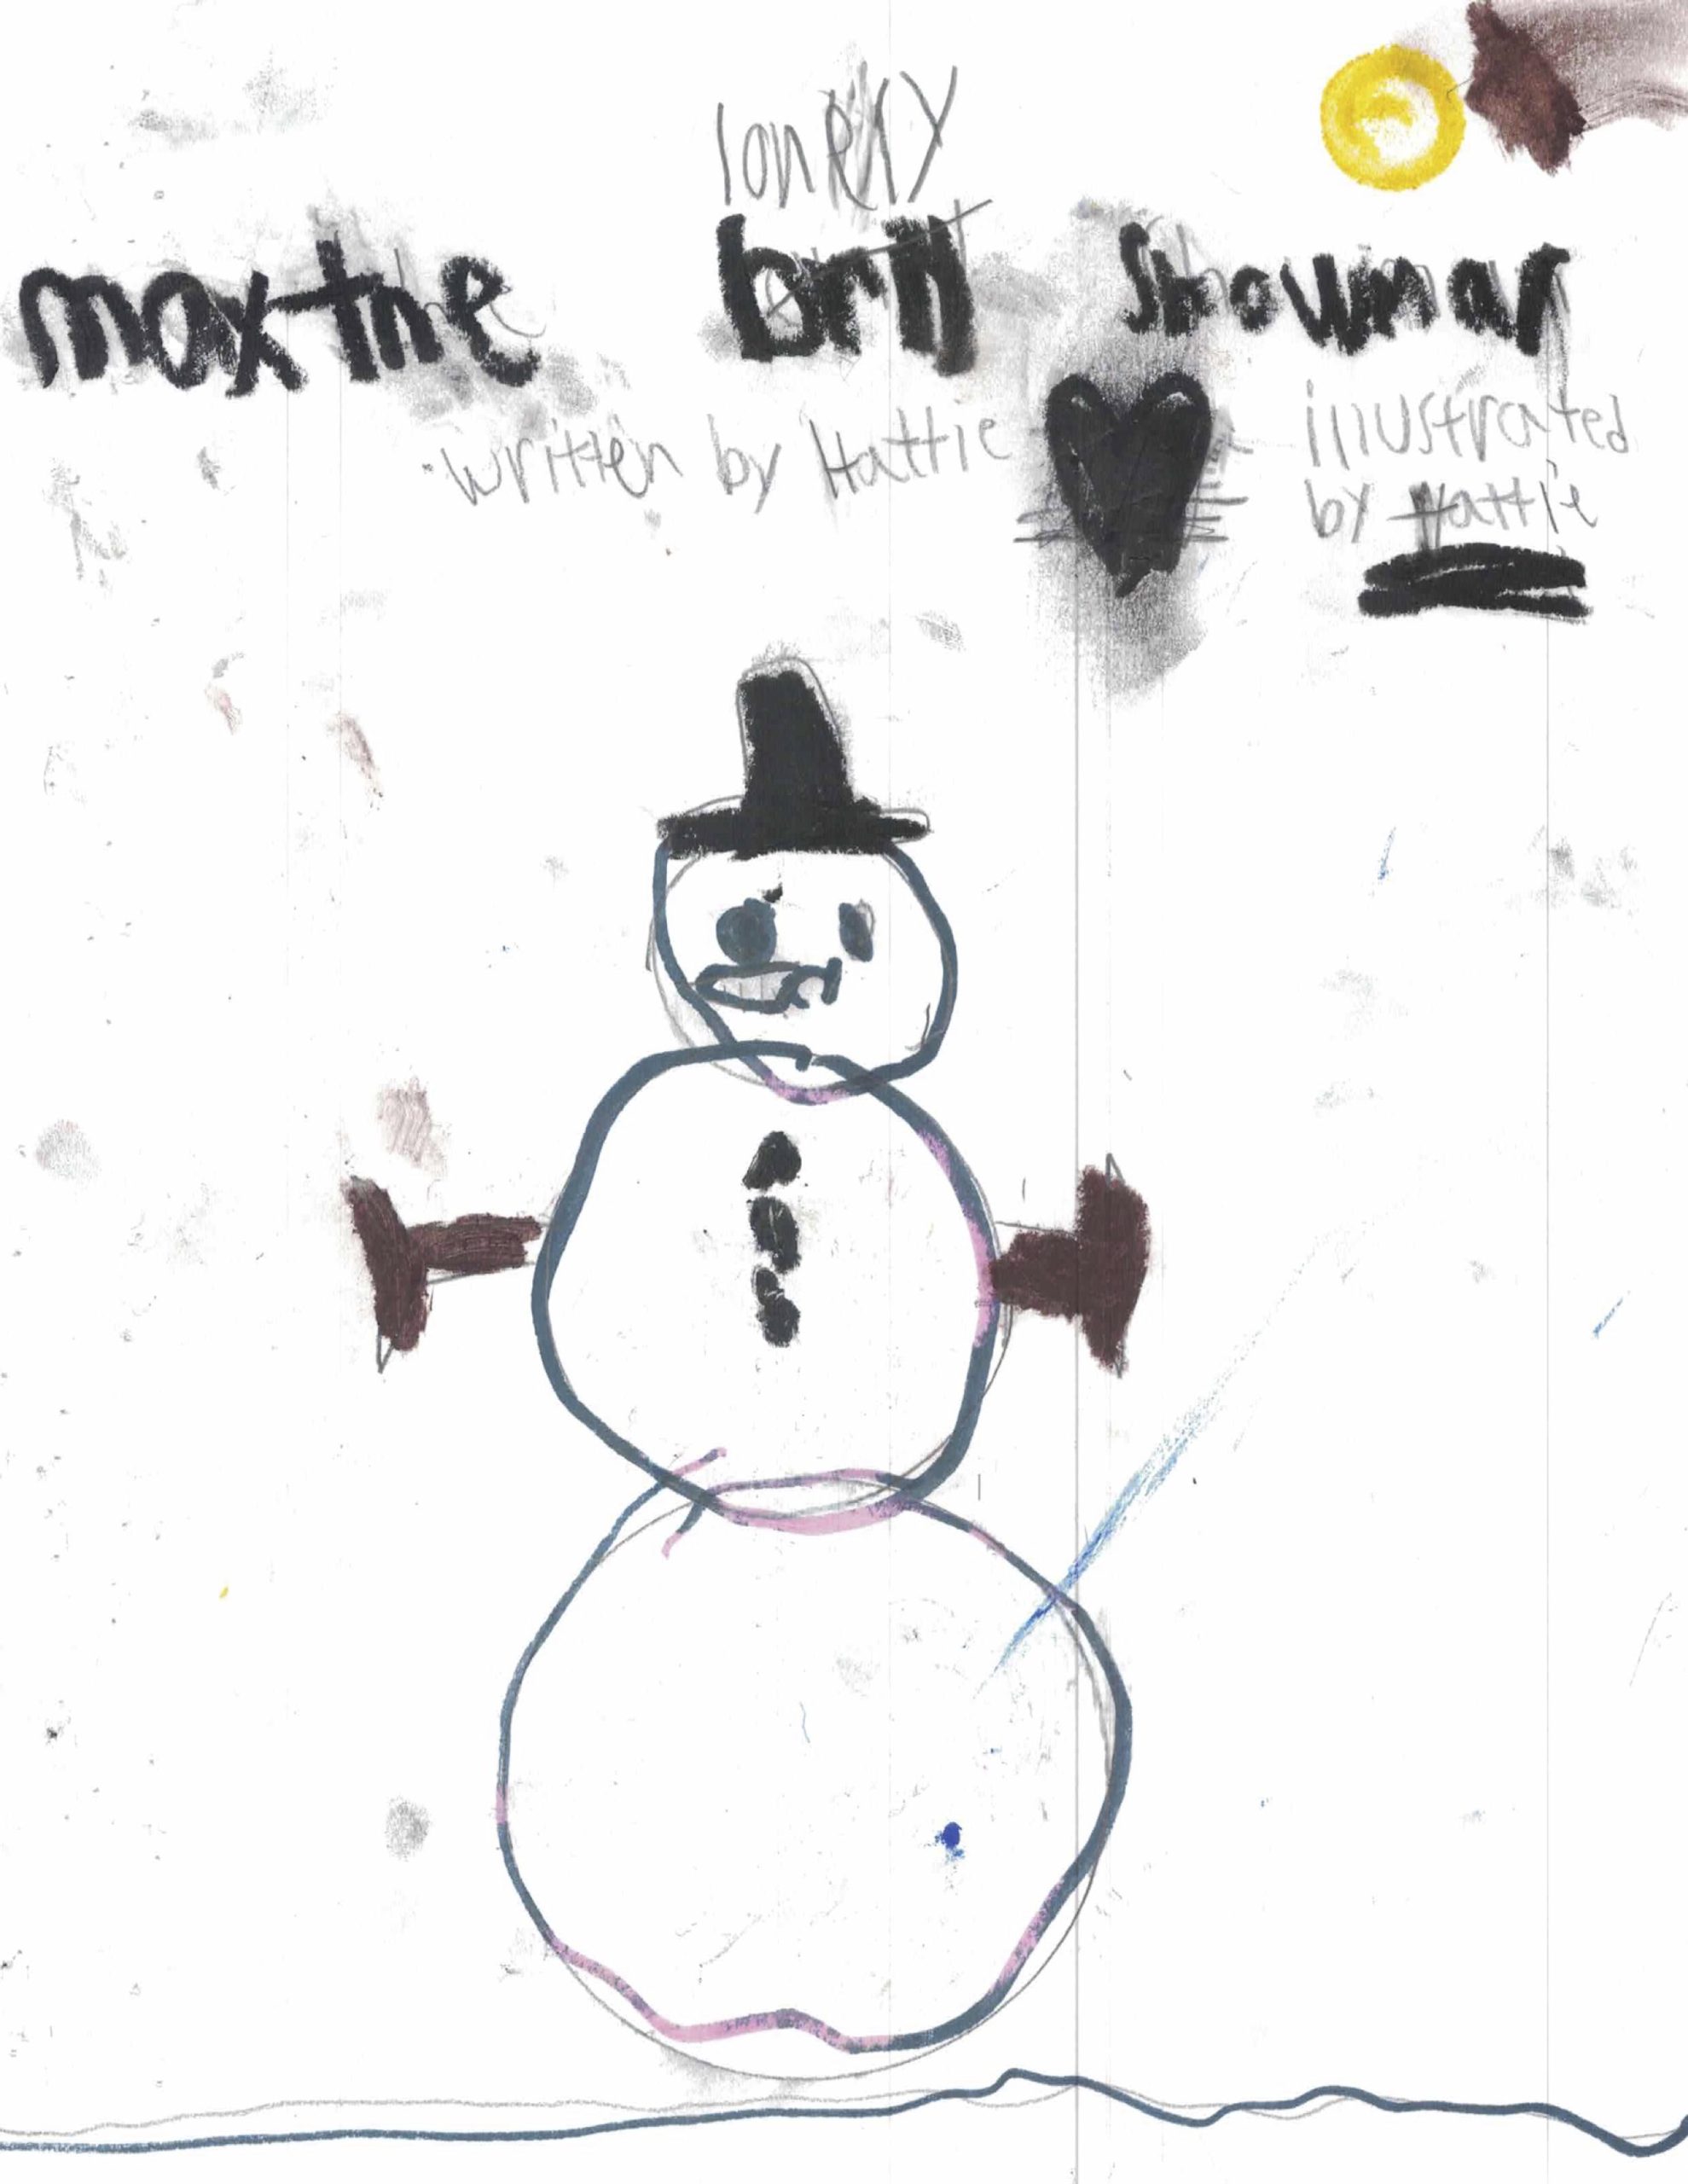 Max The Lonely Snowman by Hattie A.